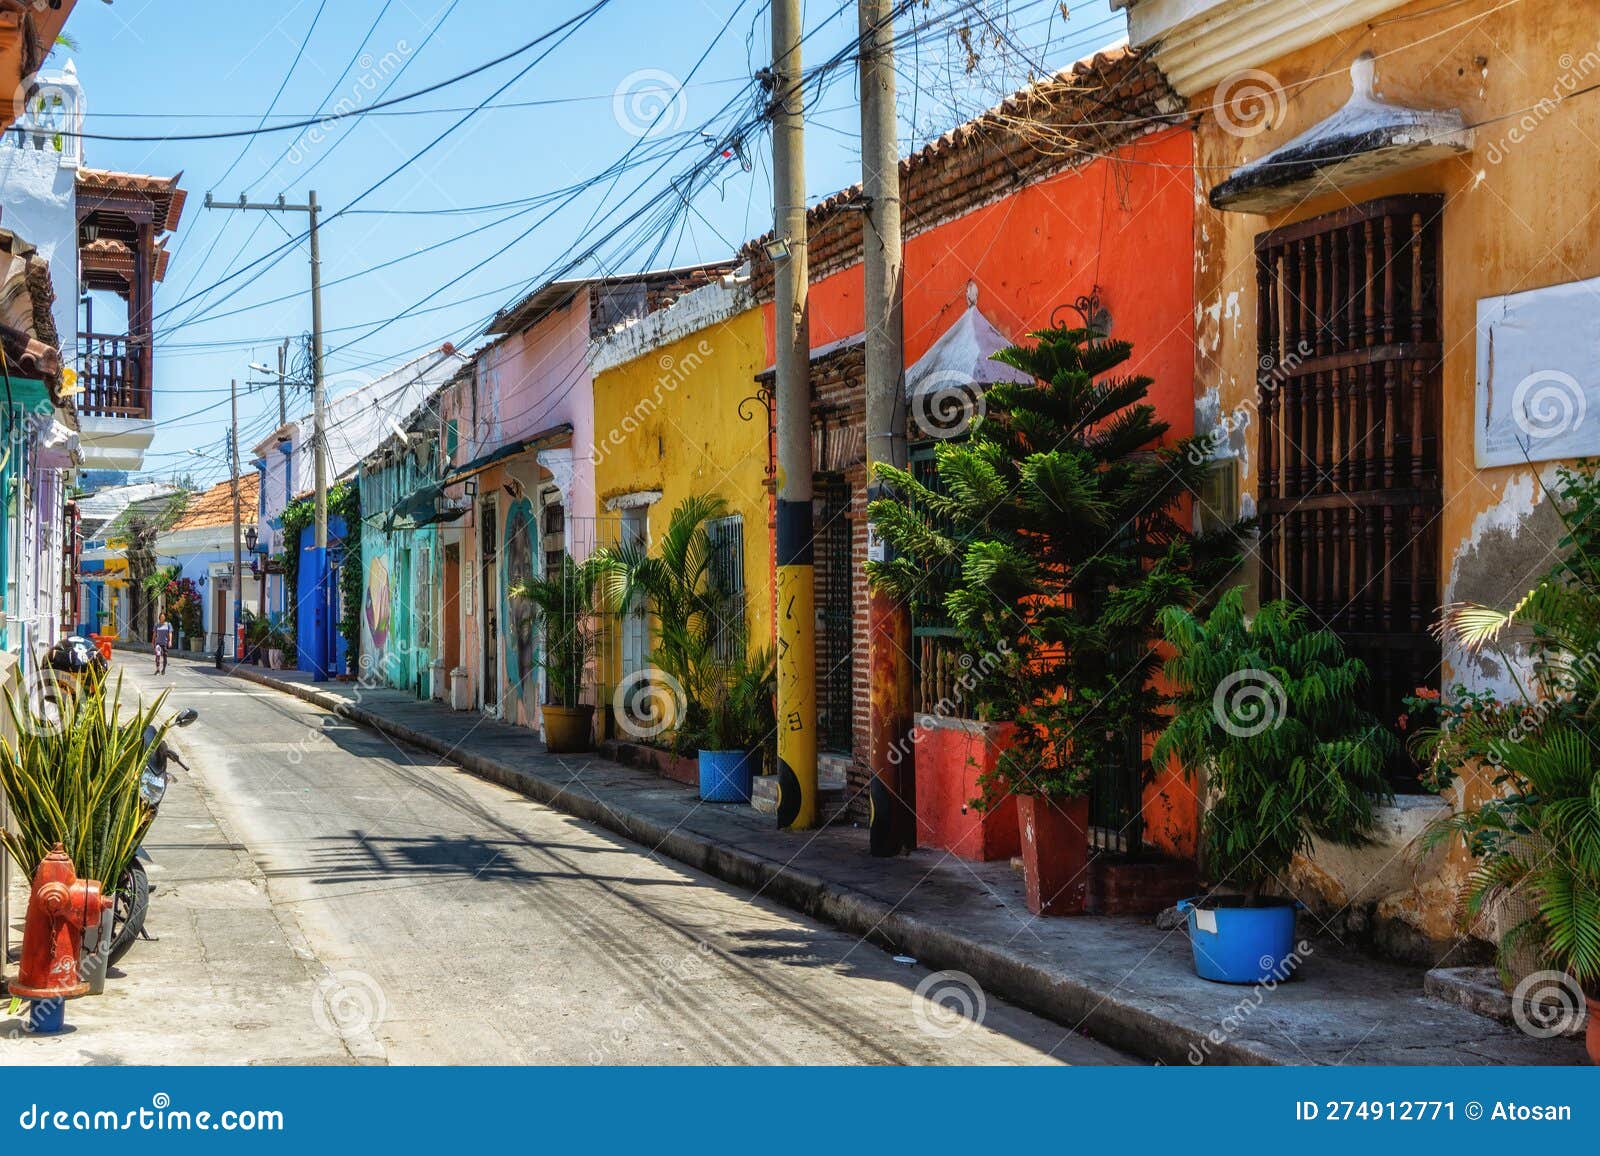 scenic colorful streets of cartagena in historic getsemani district